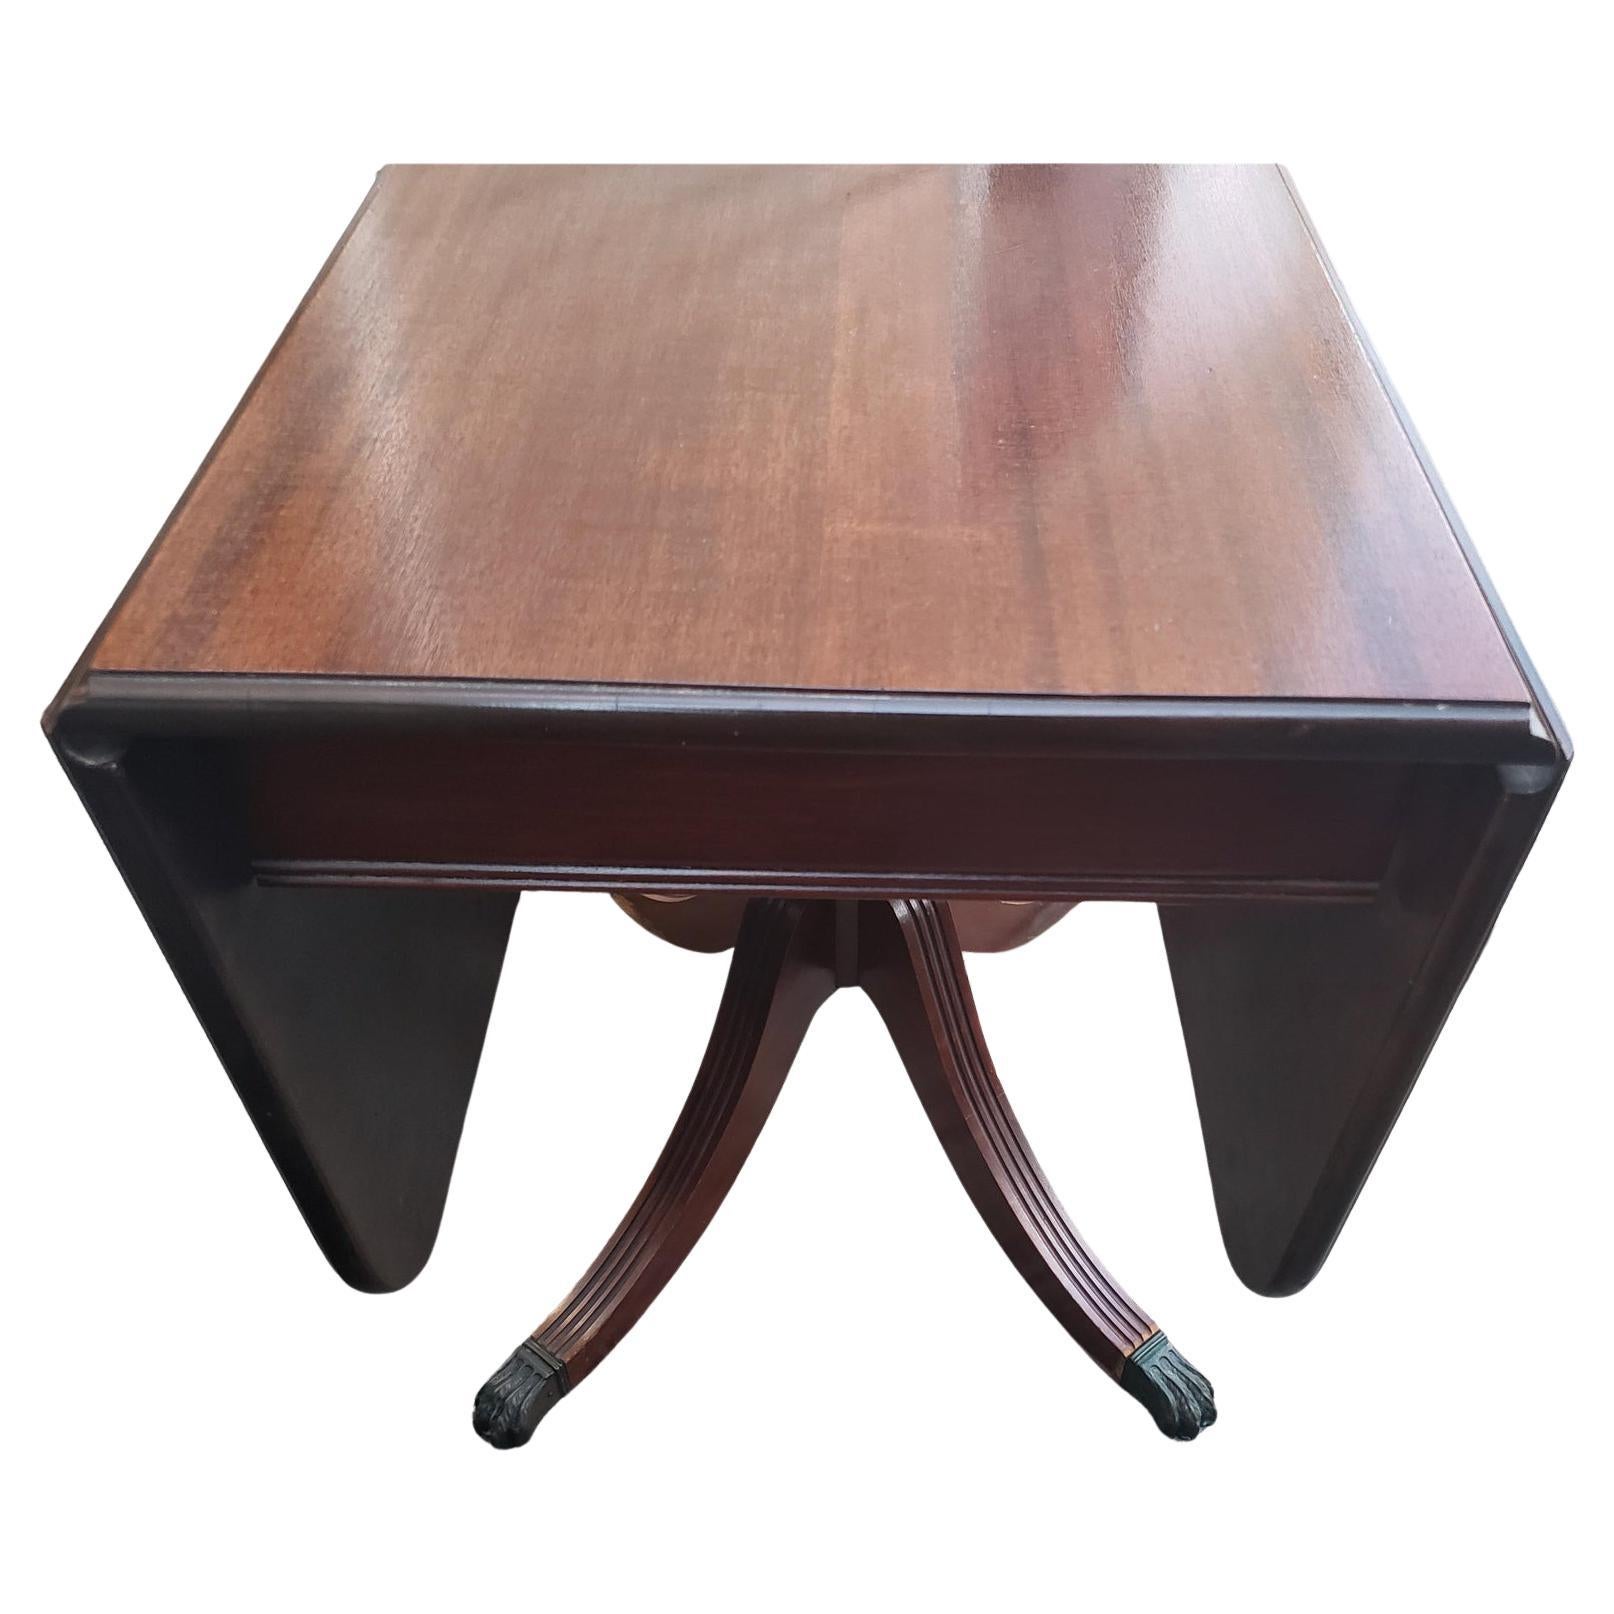 Hand-Crafted Brandt Furniture Sheraton Style Dropleaf Pedestal Dining Table, C. 1940s For Sale